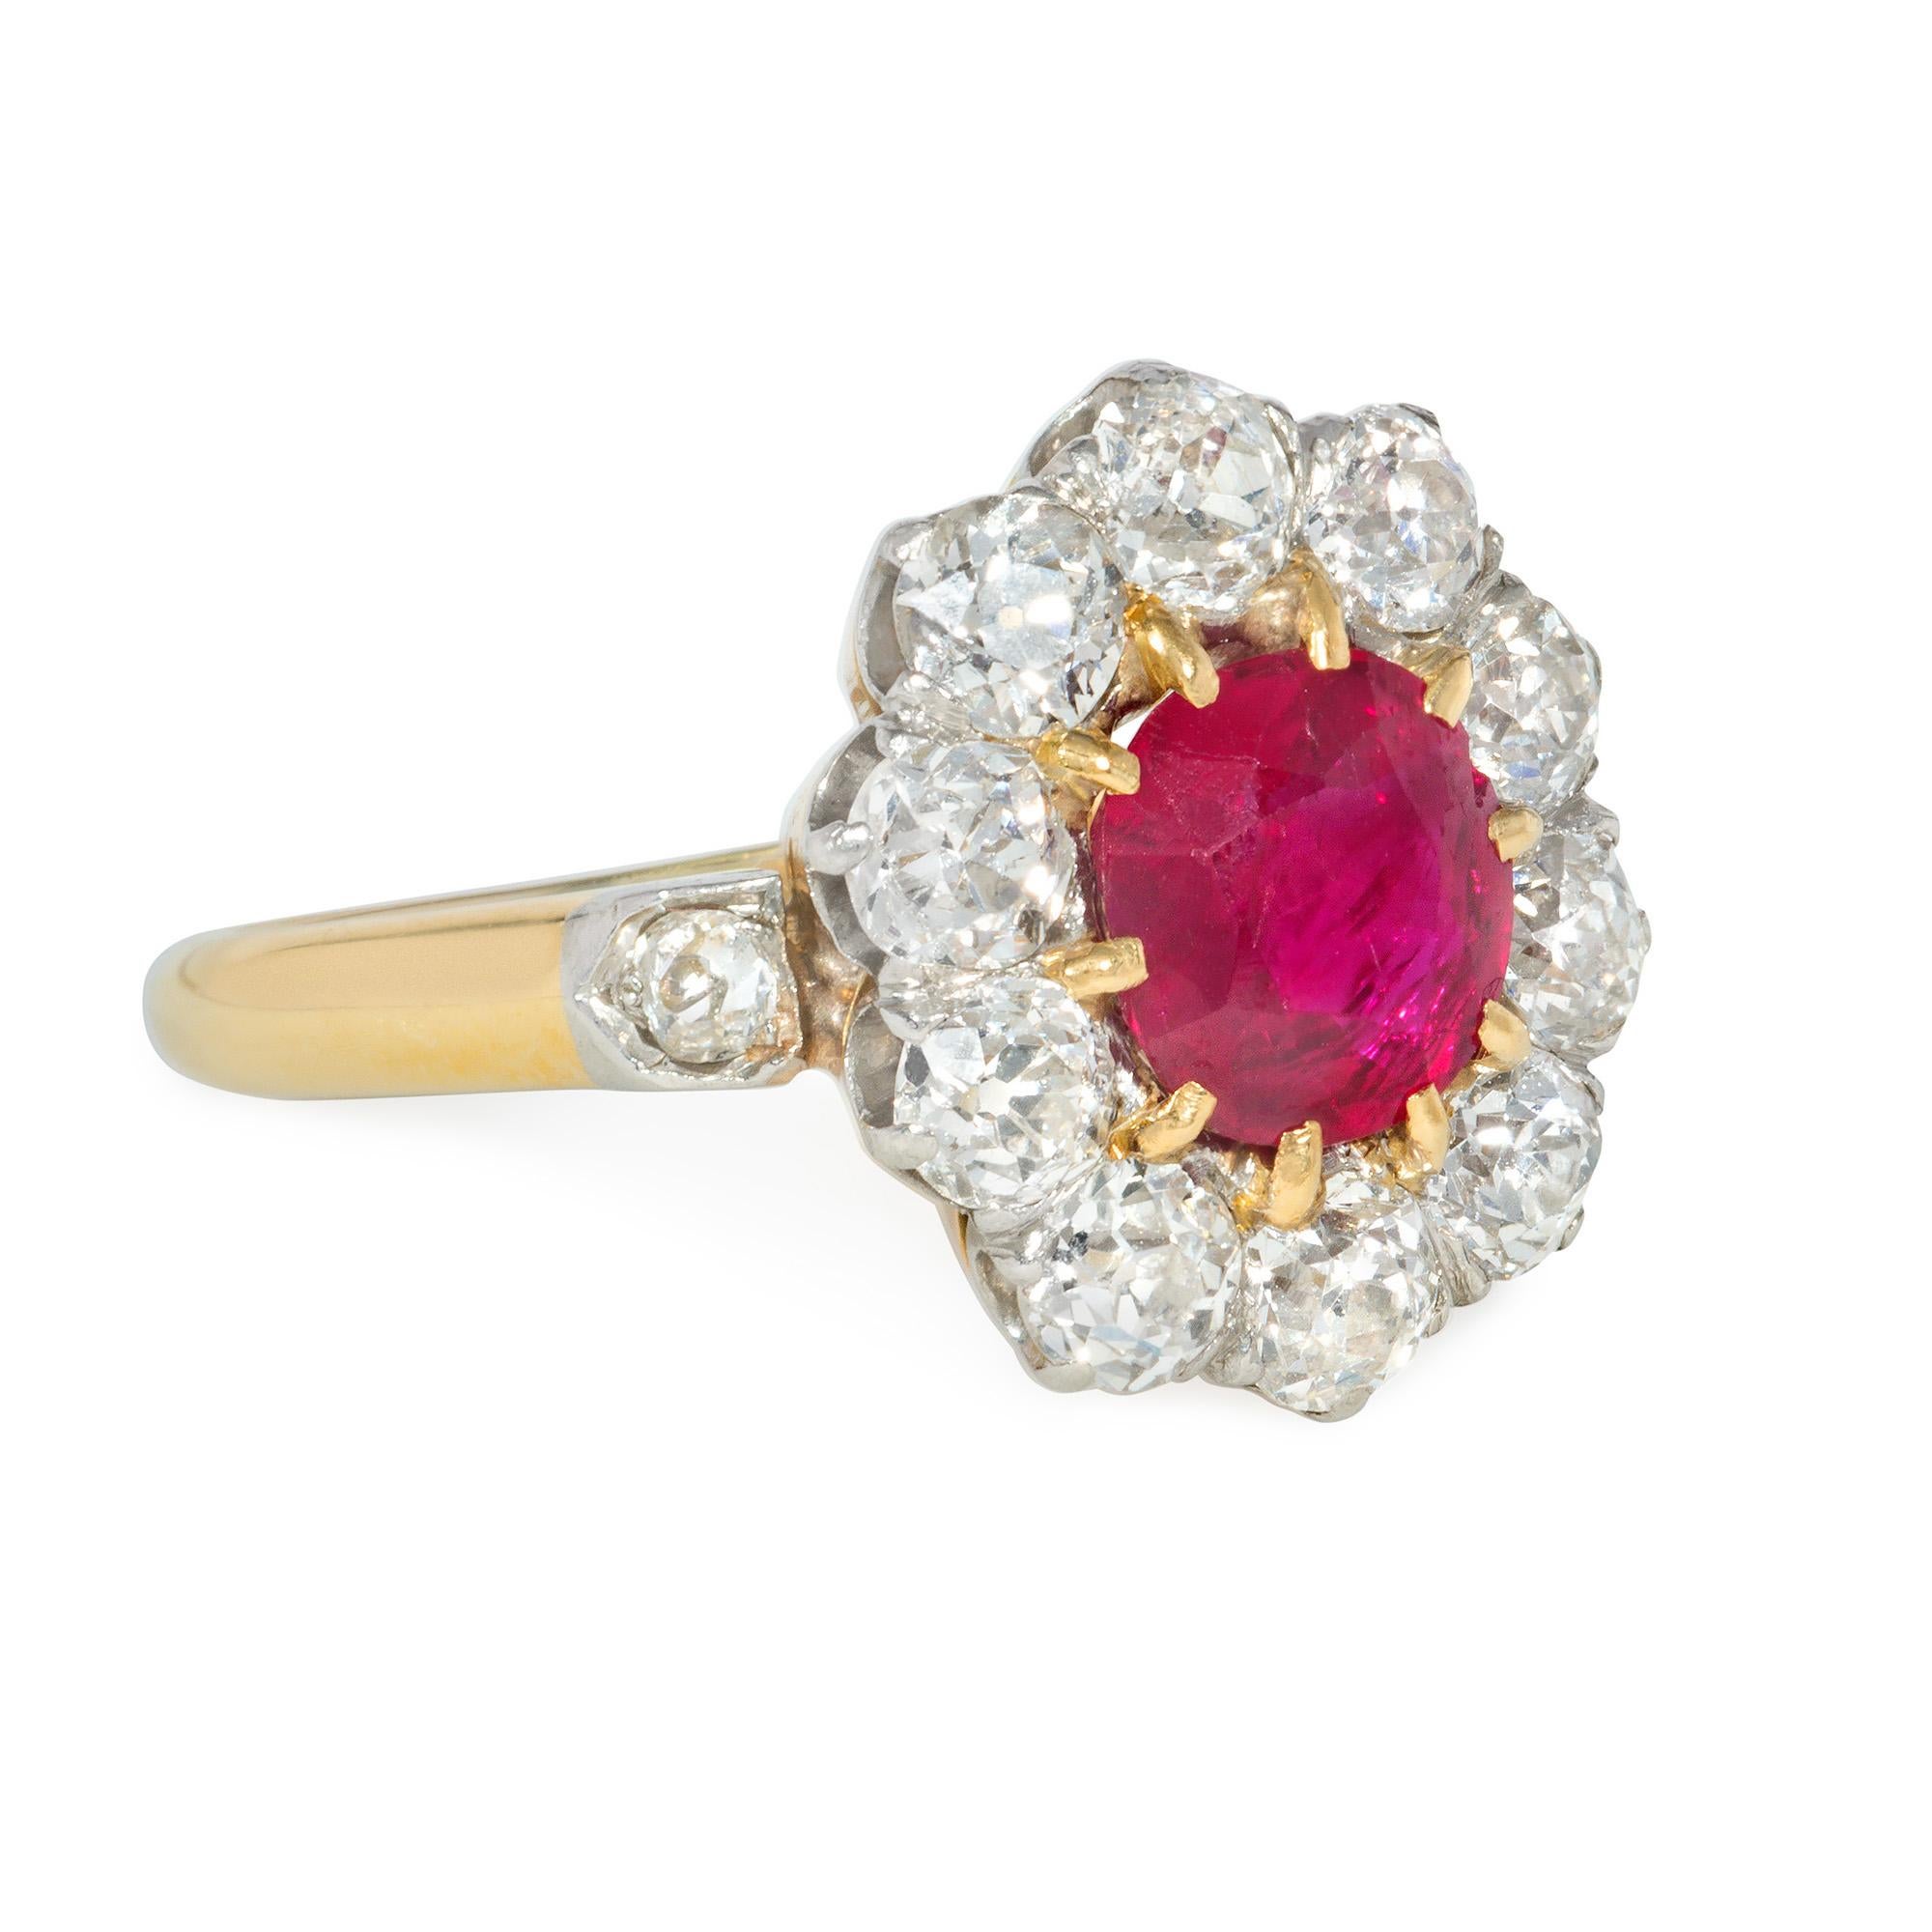 An early 20th century Edwardian period ruby and diamond cluster ring with diamond-set shoulders, in platinum and 18k gold. French import.  Atw ruby 1.40 cts., atw diamonds 1.75 cts.  AGL report stating no heat treatment, origin: Thailand

Face-up